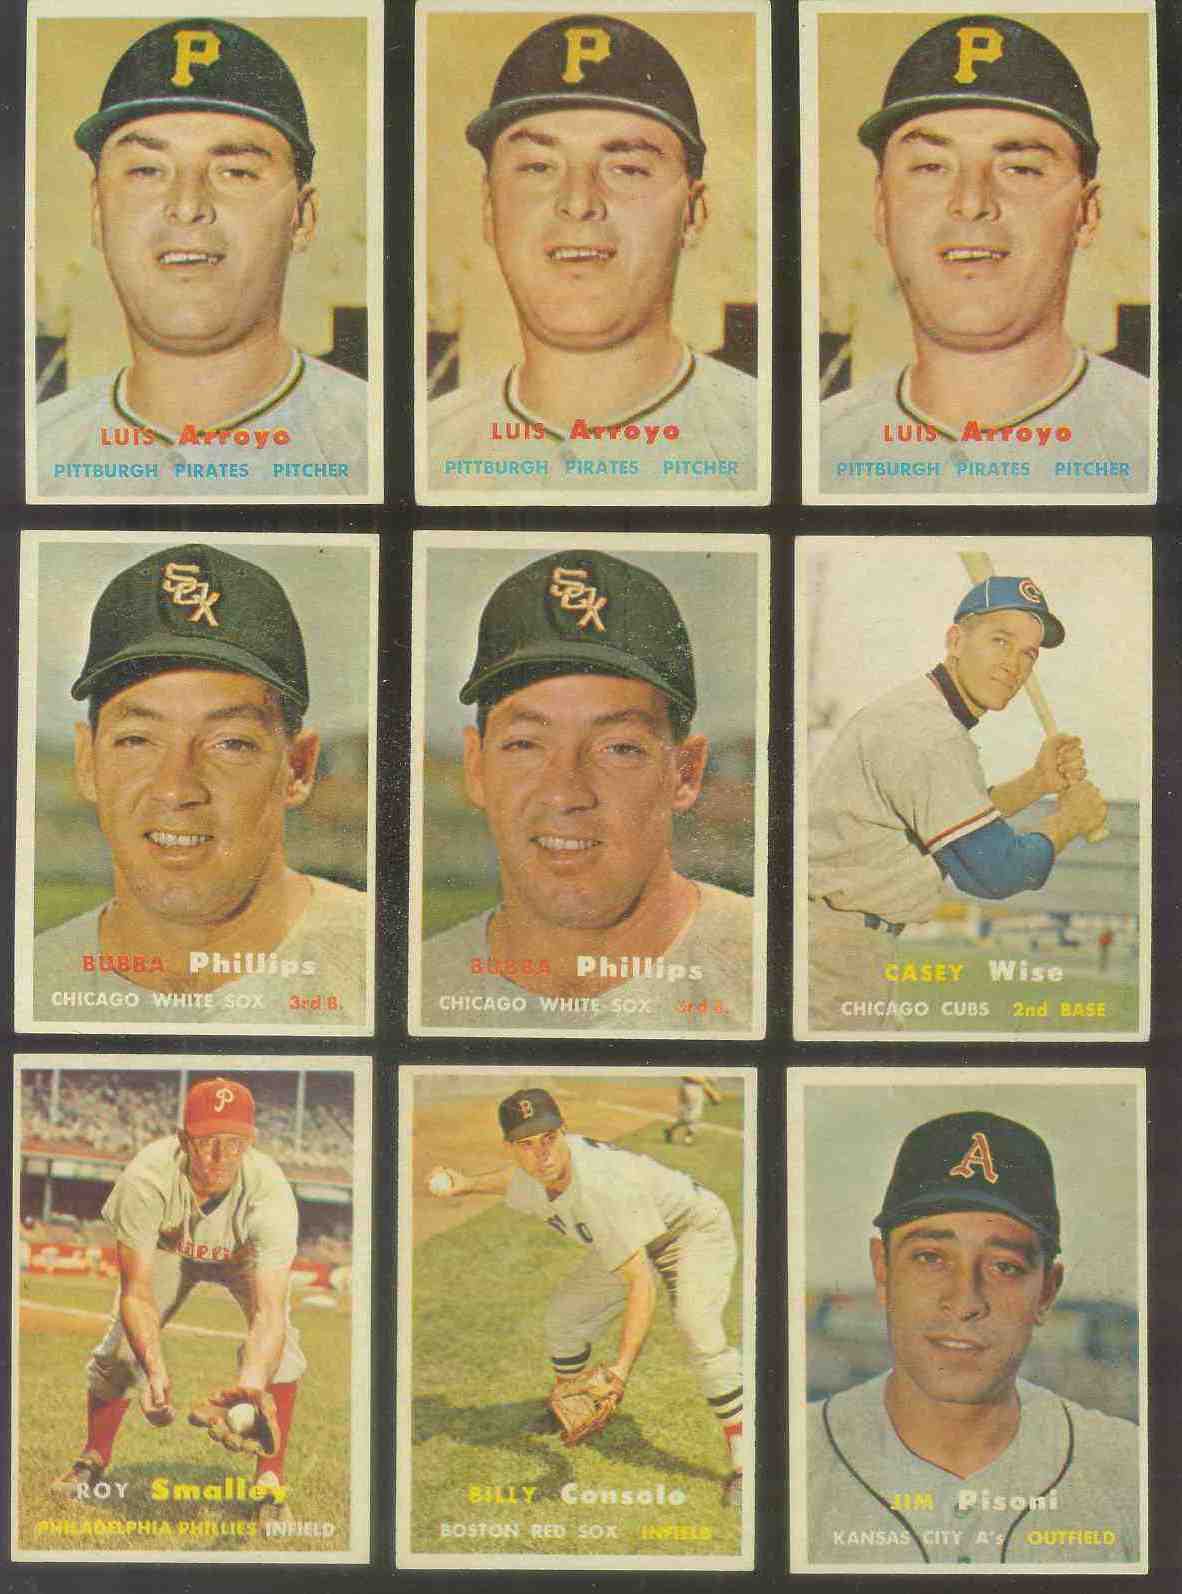 1957 Topps #399 Billy Consolo (Red Sox) Baseball cards value